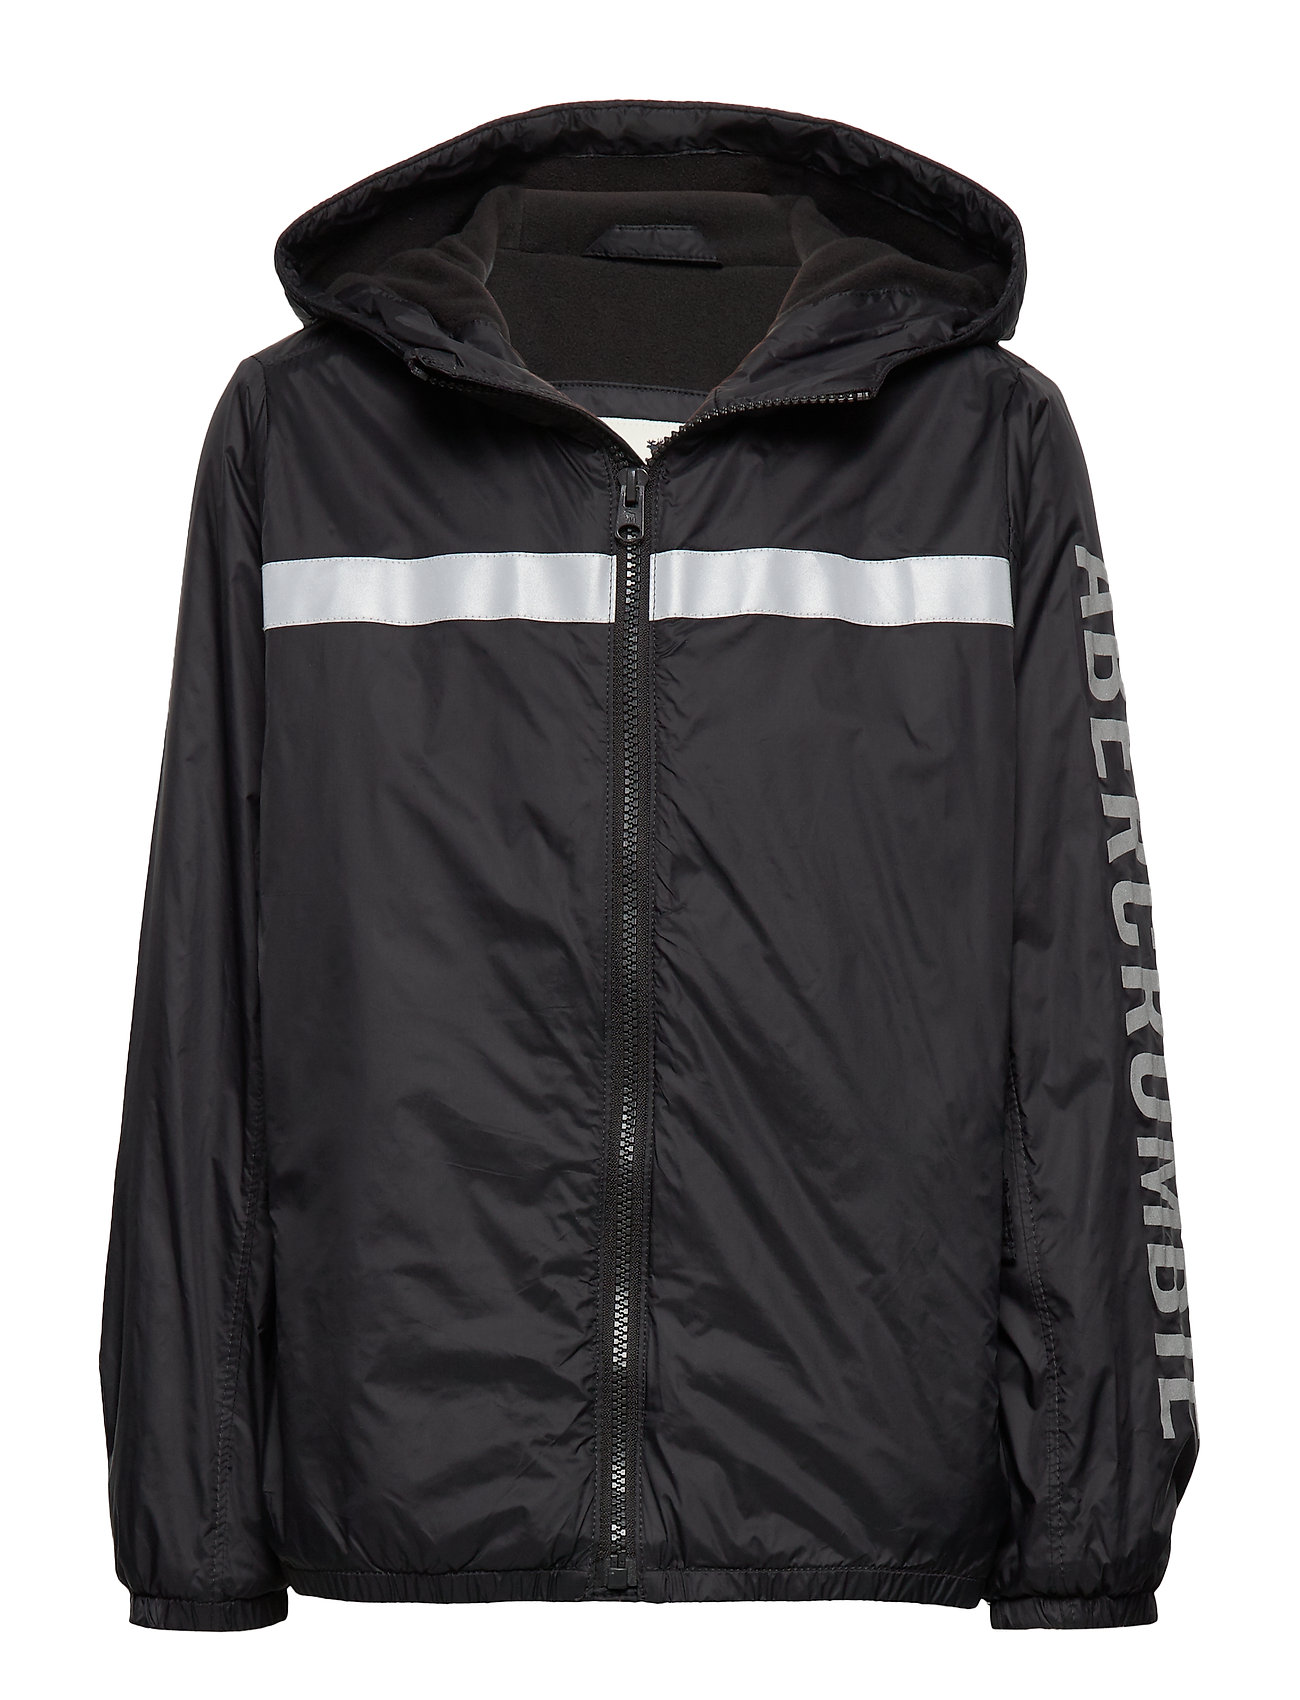 abercrombie and fitch windbreaker